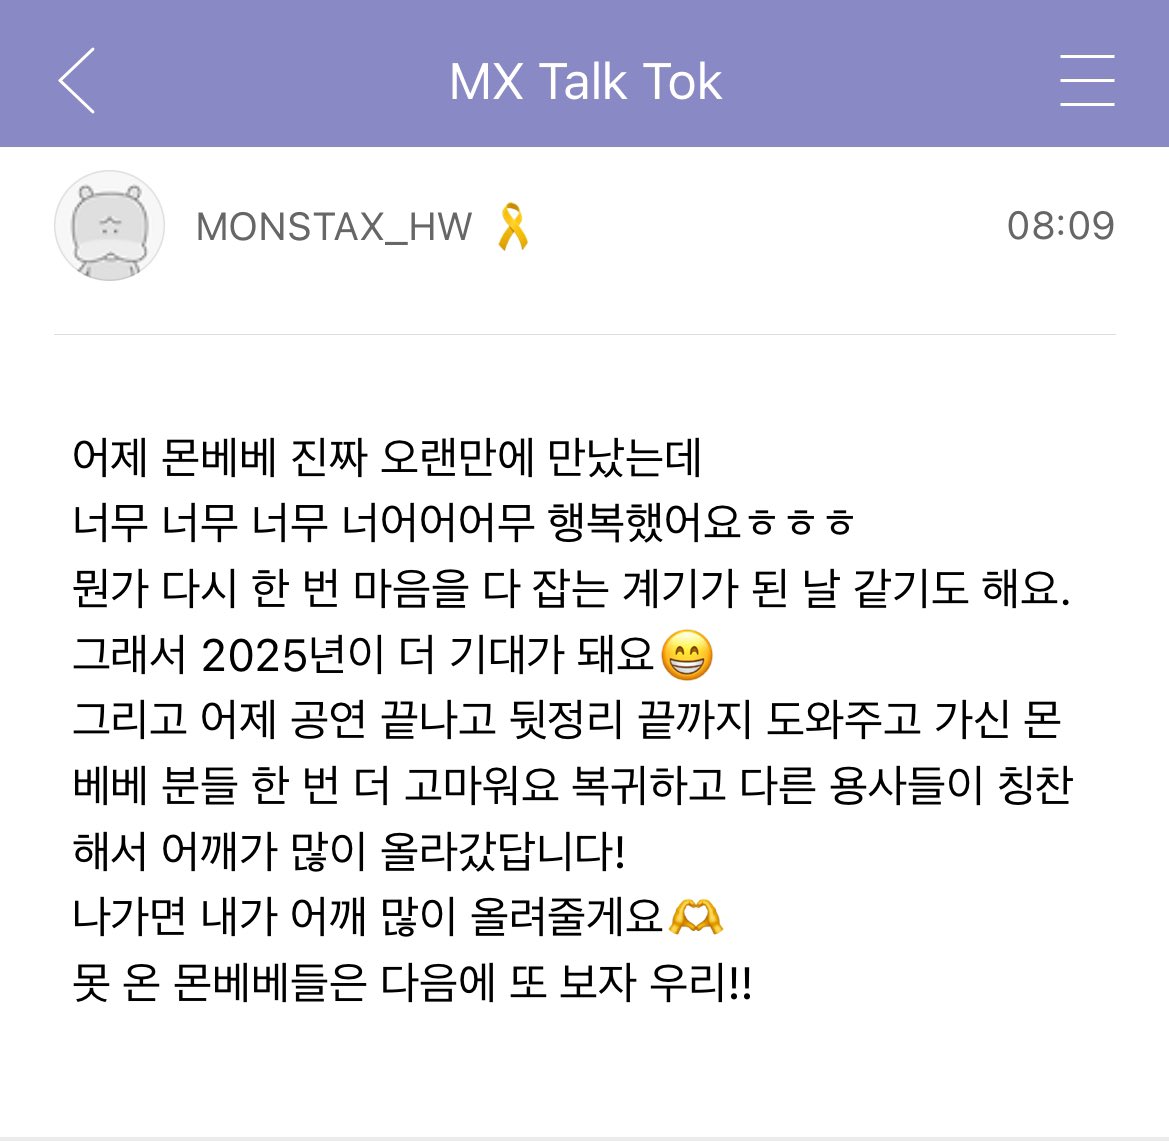 [240427] HYUNGWON at MX TALK TOK

🐢 Meeting Monbebe after such a long time yesterdah made me so so so sooooo happy, hohoho.
It felt like a day tht really helped me get my heart back on track. 
Makes me even more excited for 2025 😁
And special thanks to the Monbebe—